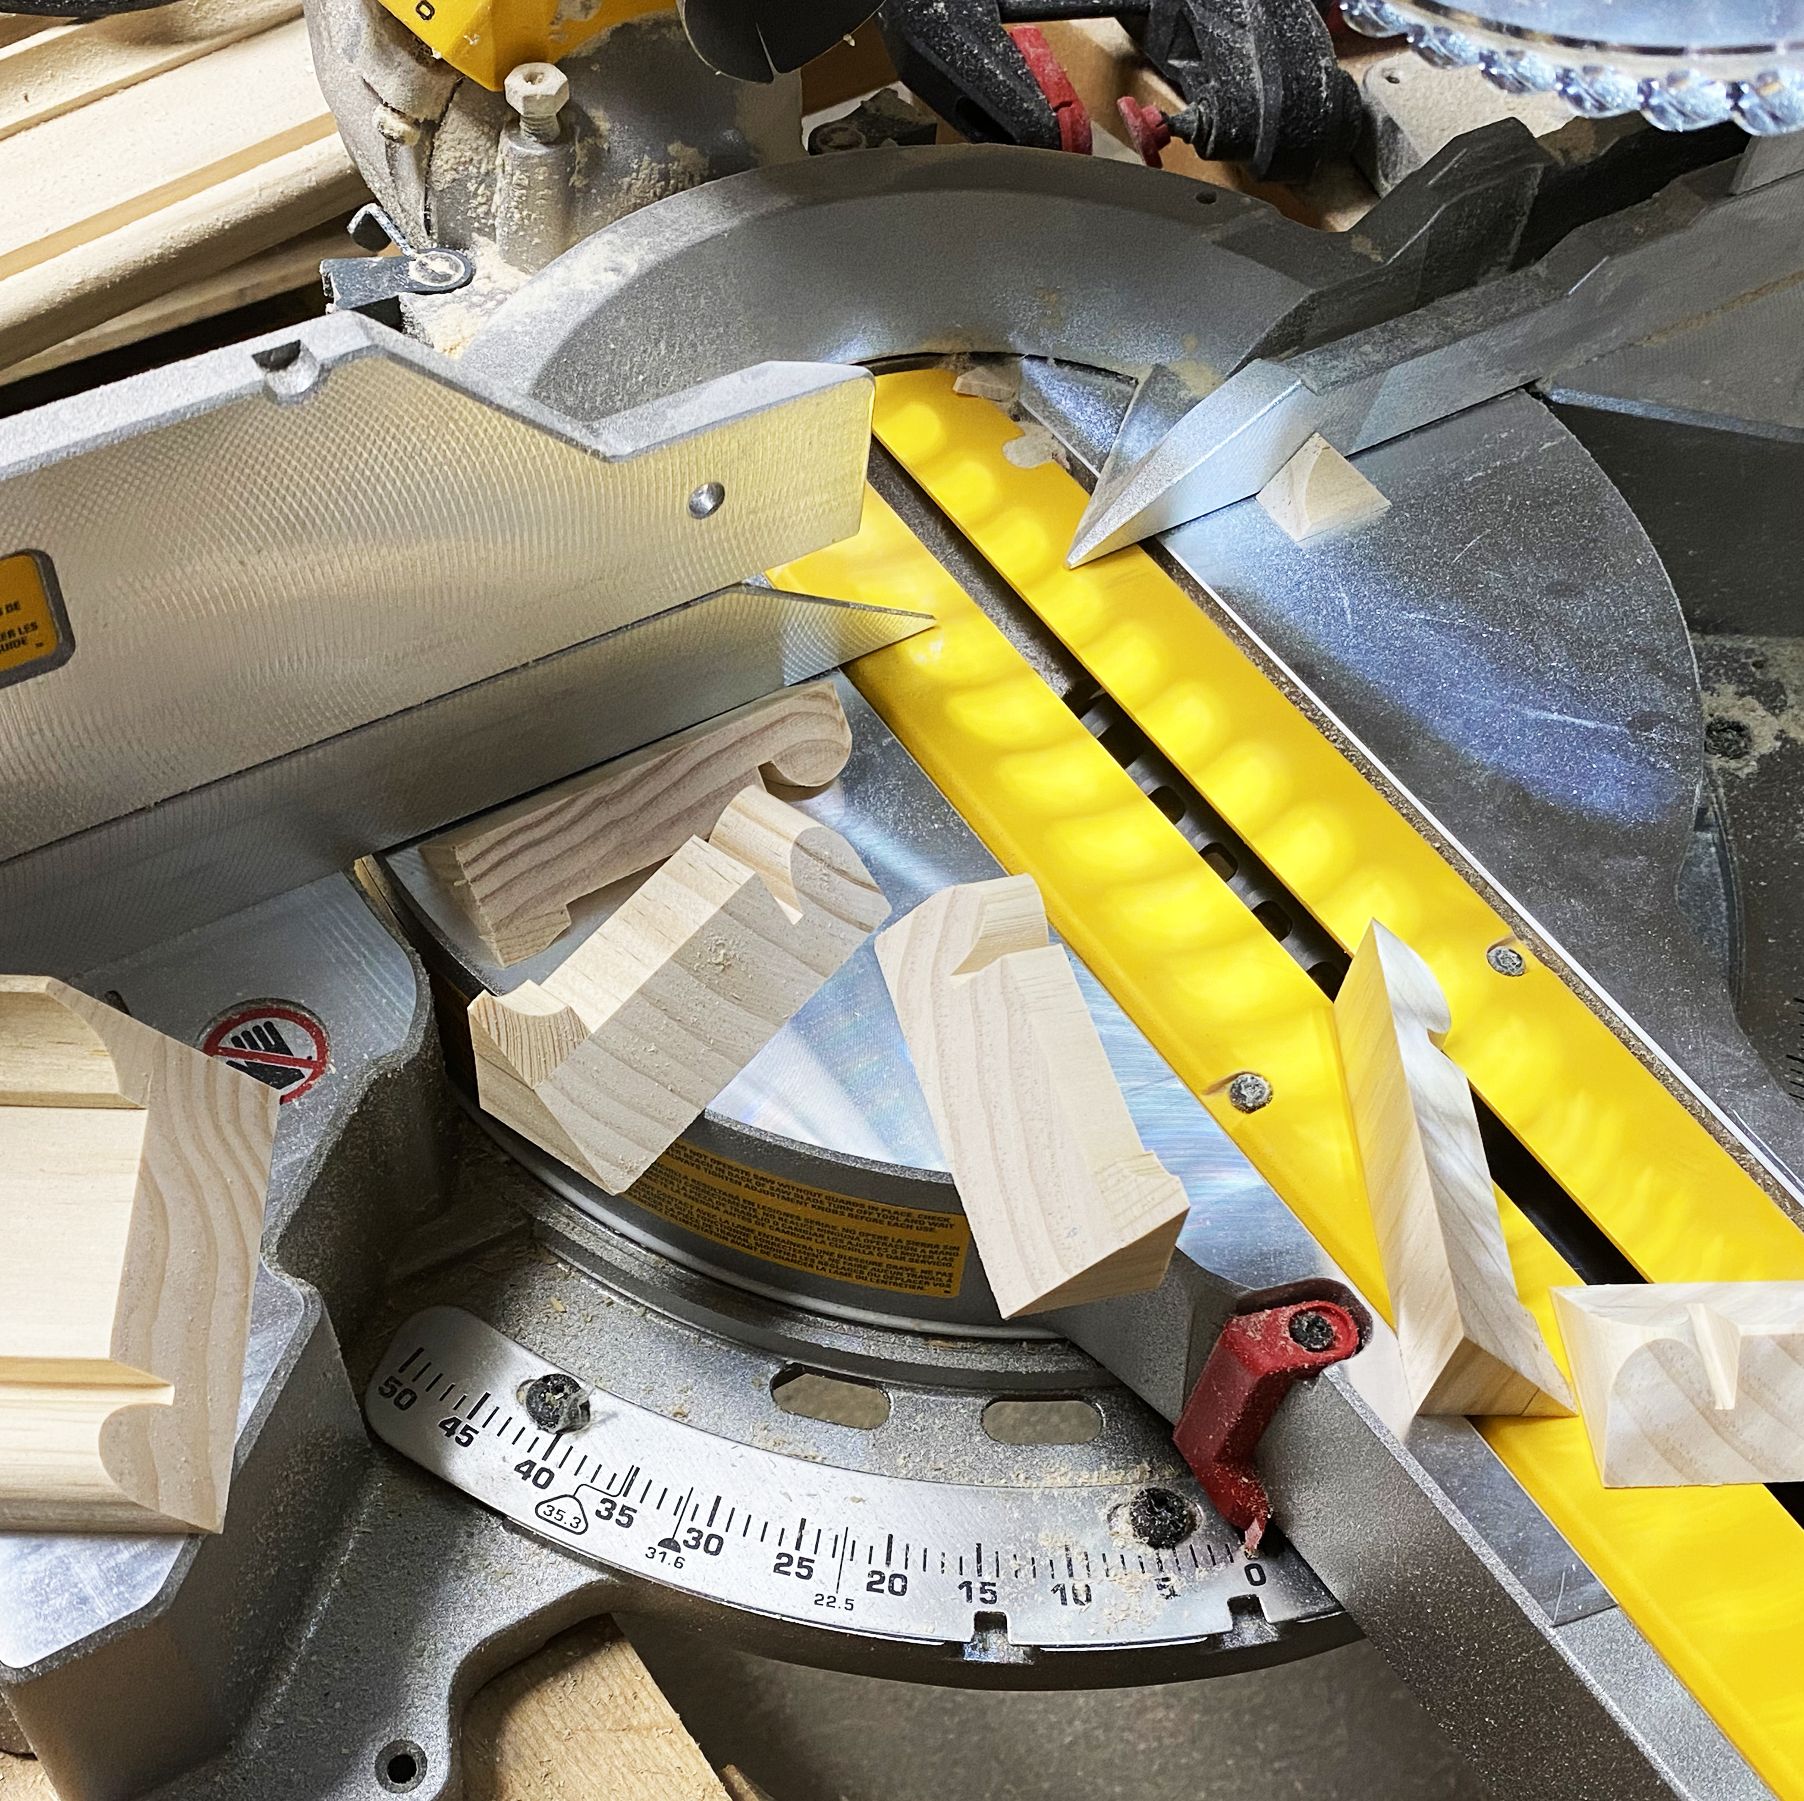 DeWalt's Dual-Bevel Compound Miter Saw Excels at Both Rough and Fine Work